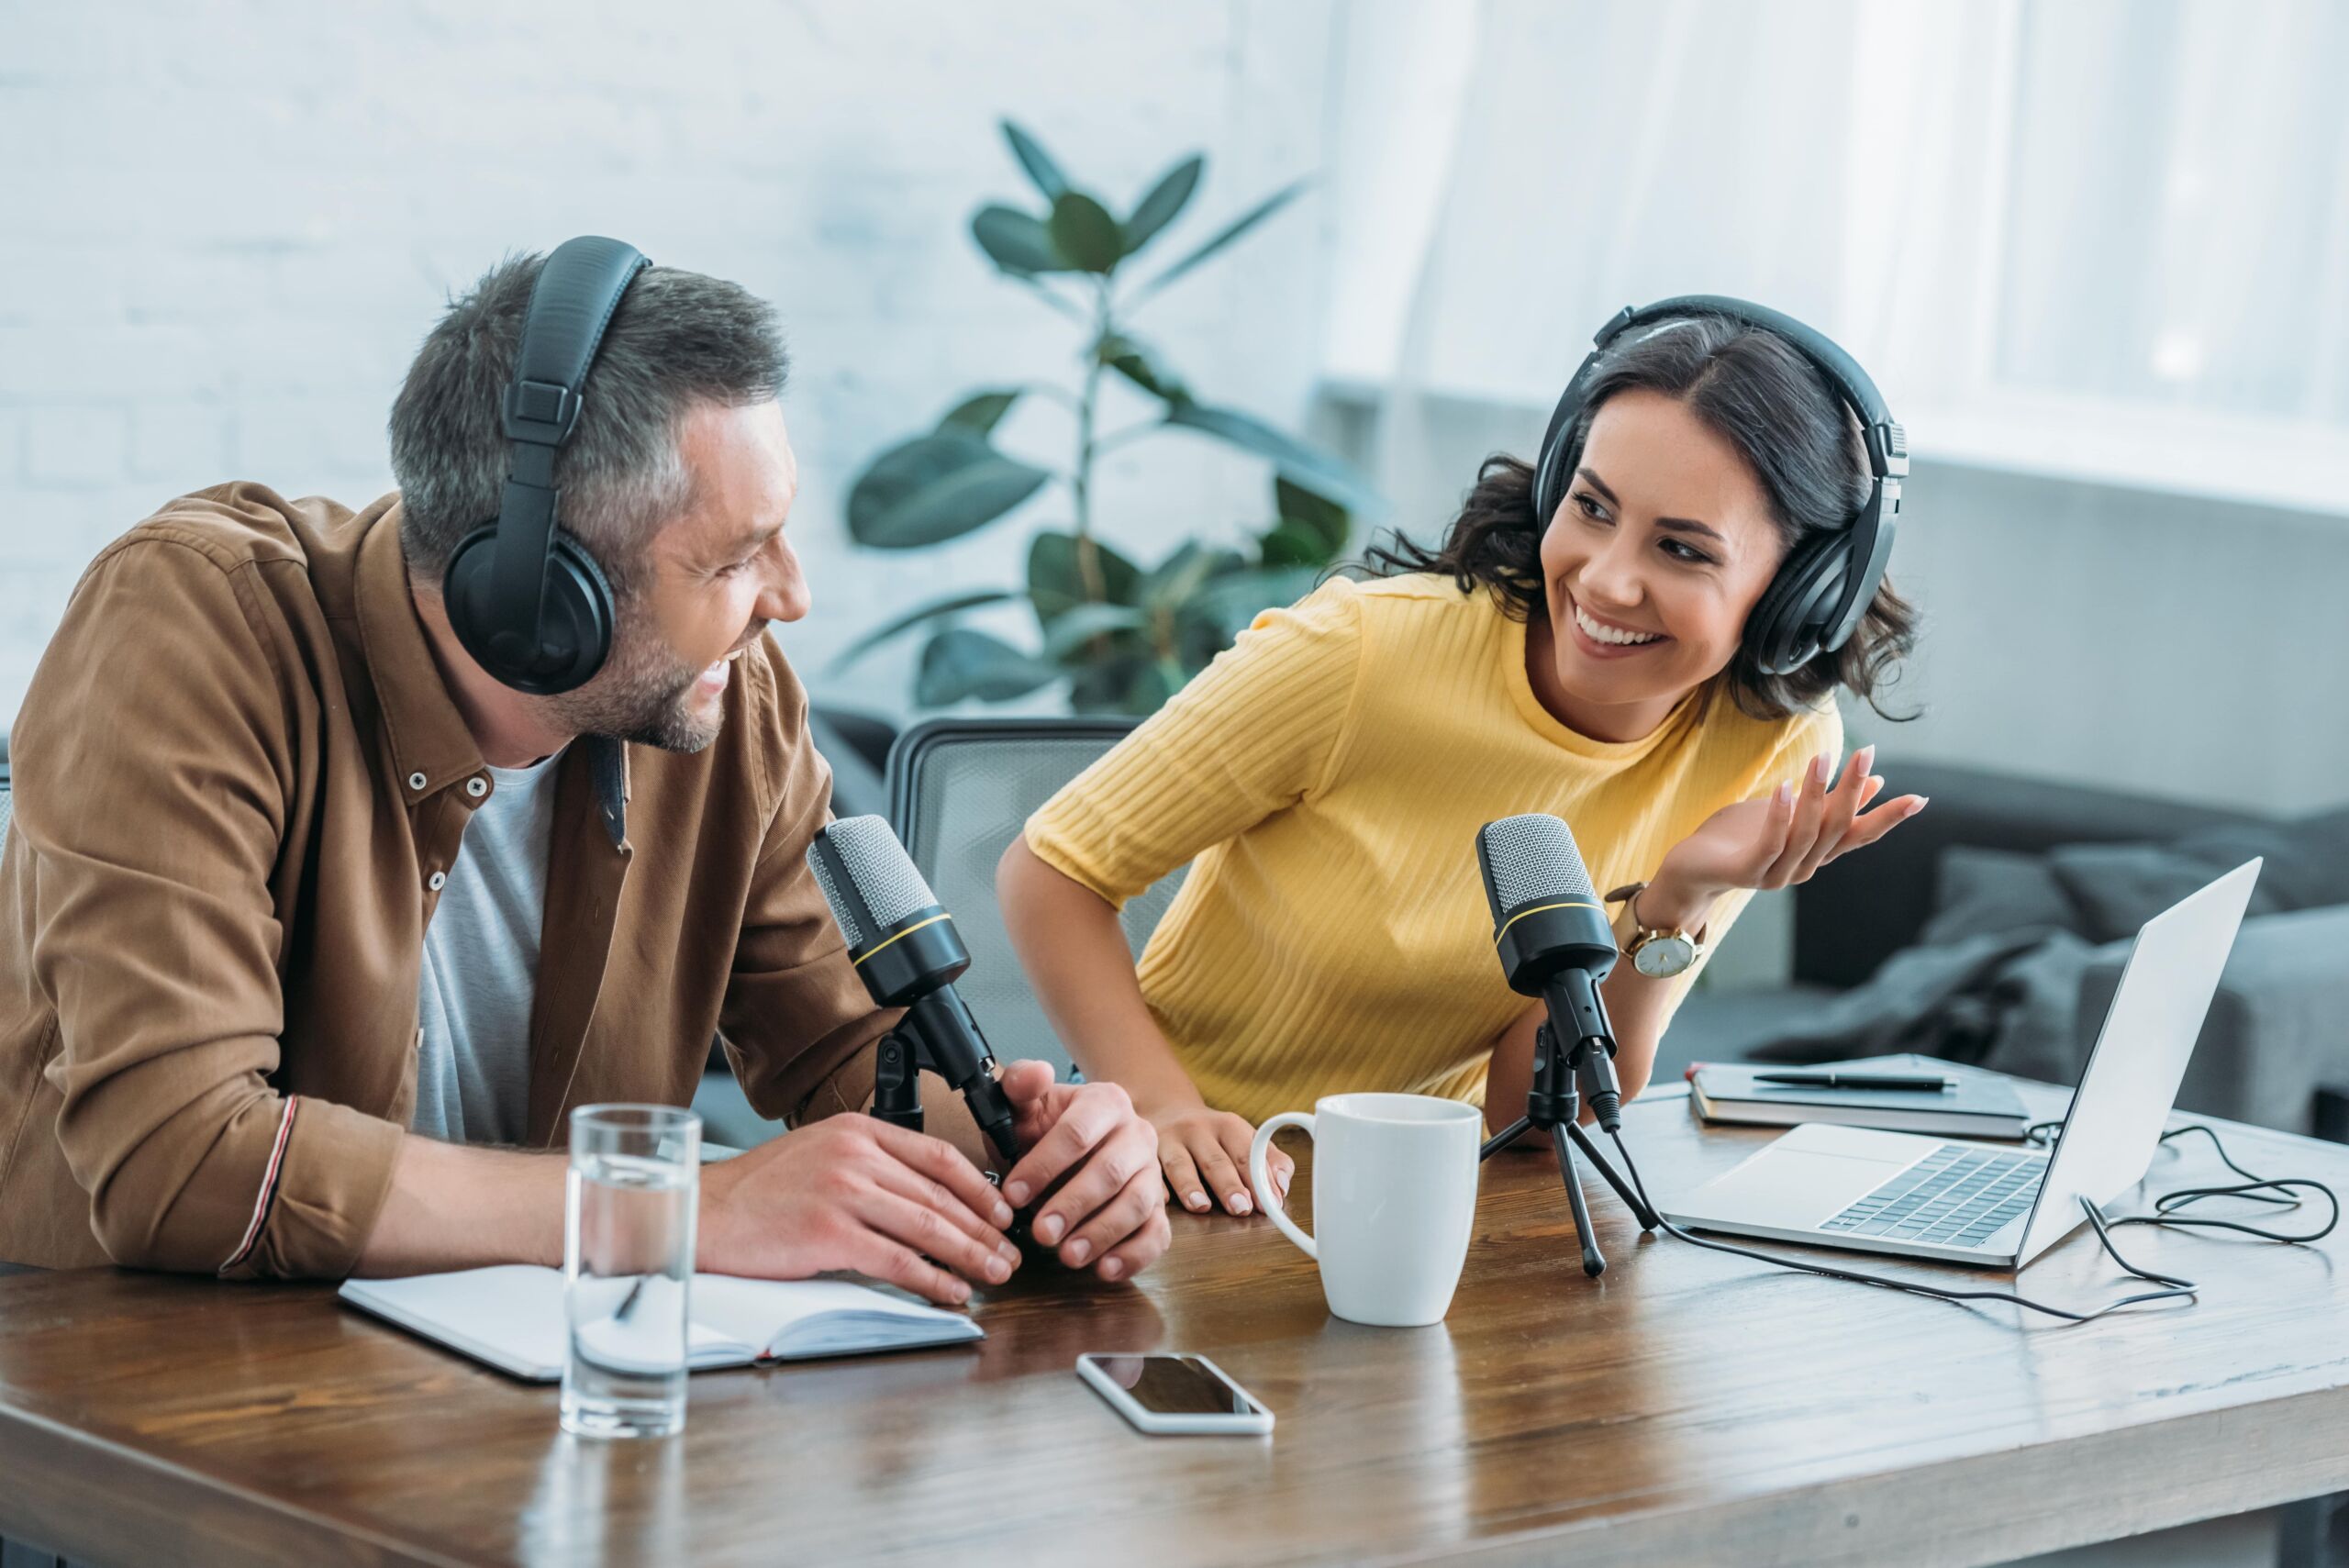 Expand your business presence through Podcasting